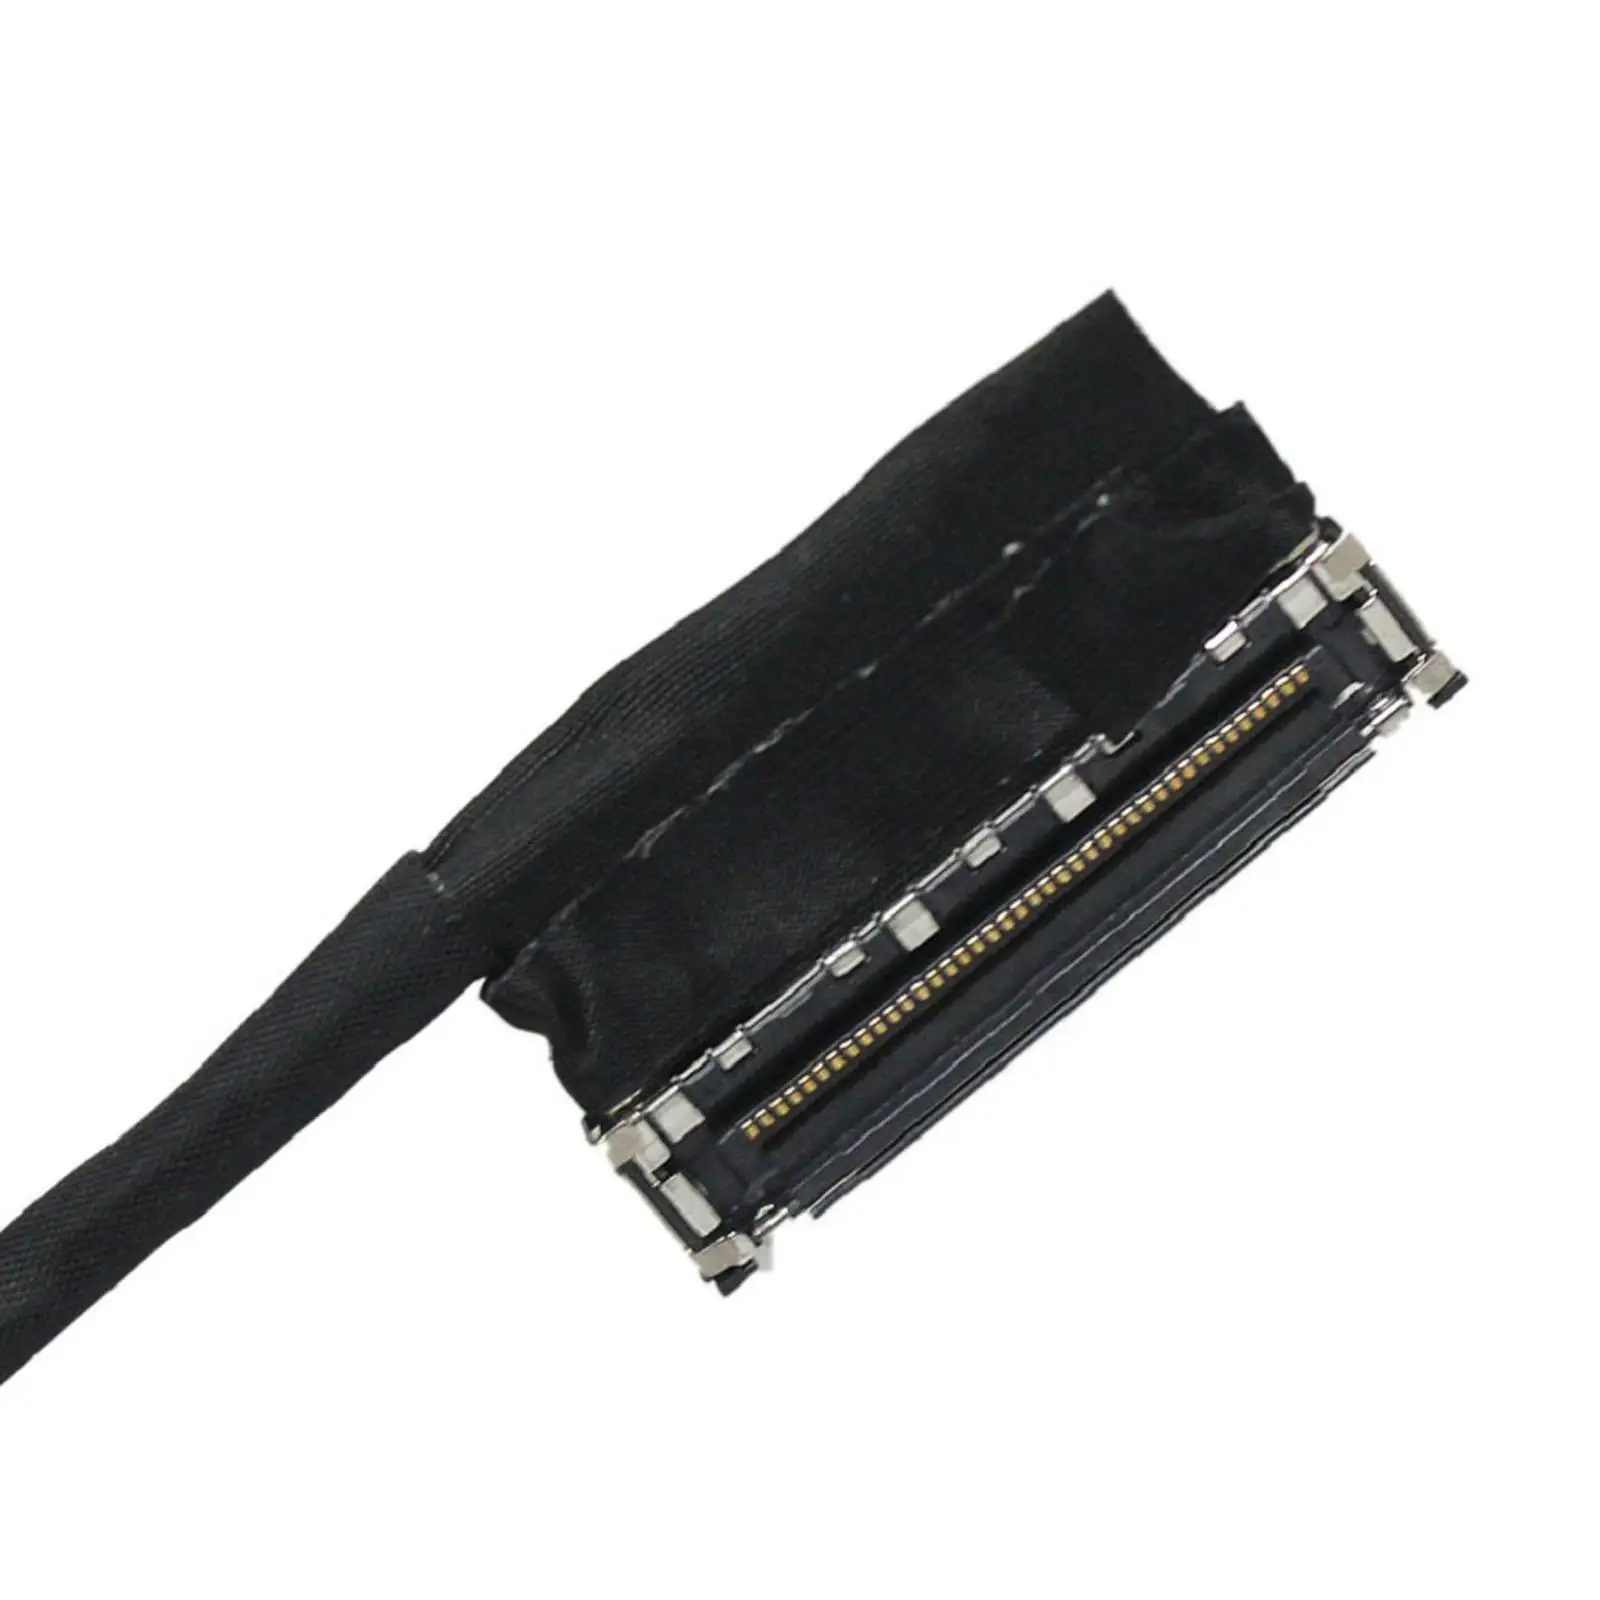 Professional LCD Video Screen Cable Replaces for VX15 DC02002QL00 VX5-591G Easy to Install High Performance